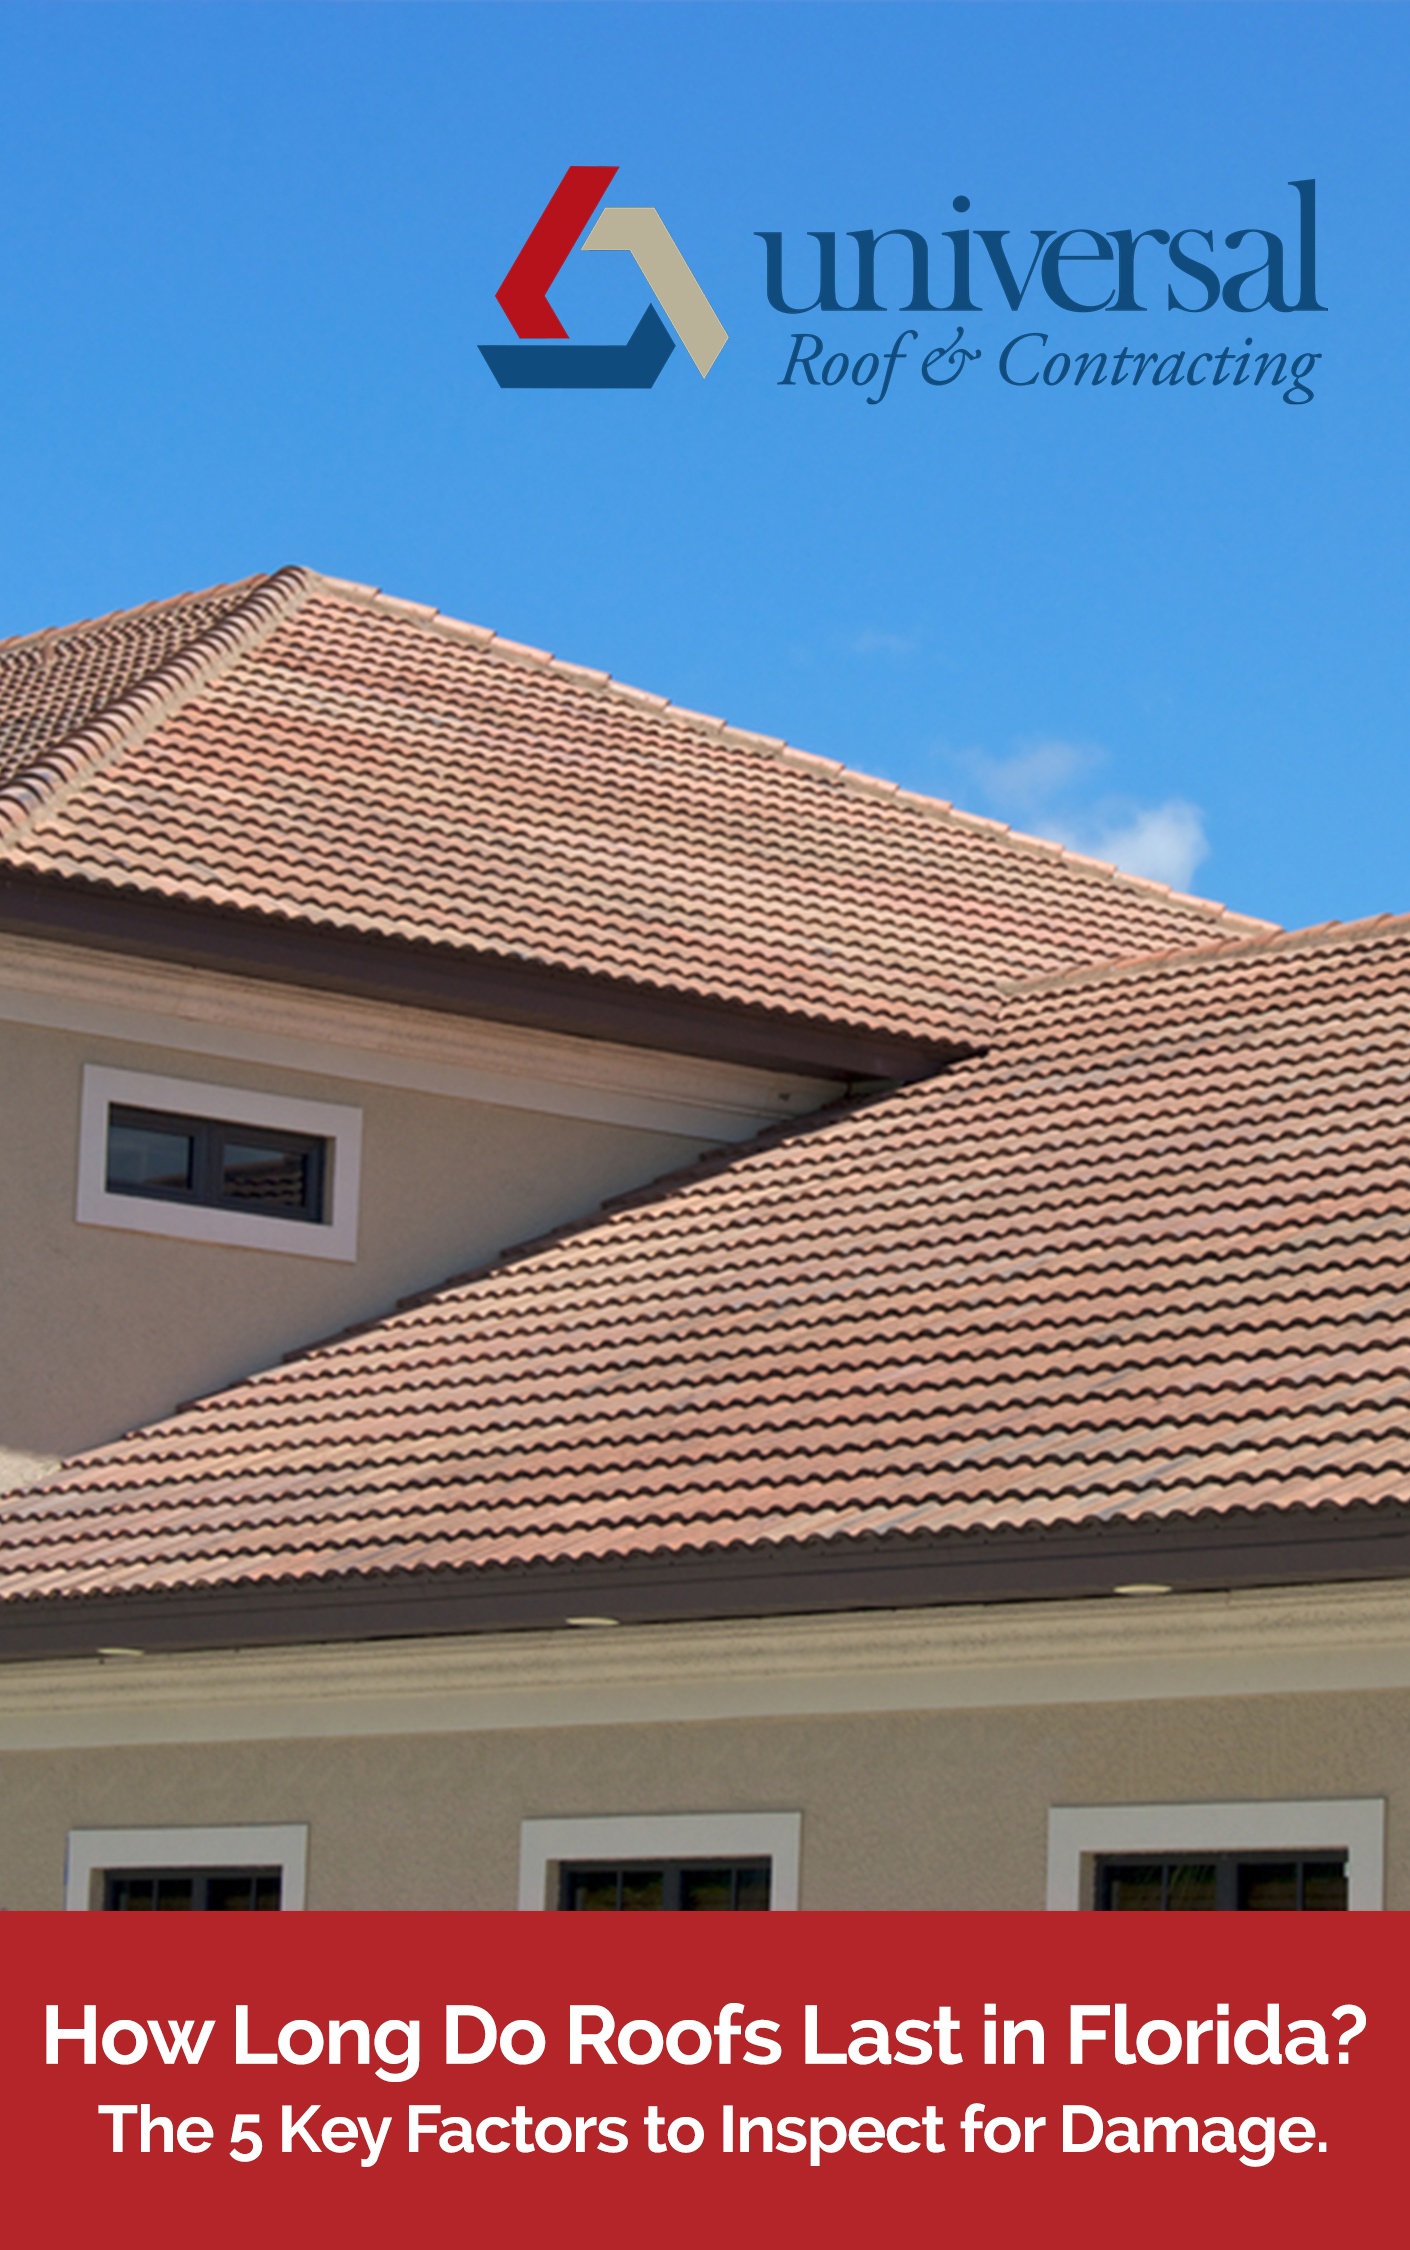 Universal Roofing How Long Do Roofs Last Florida.jpg